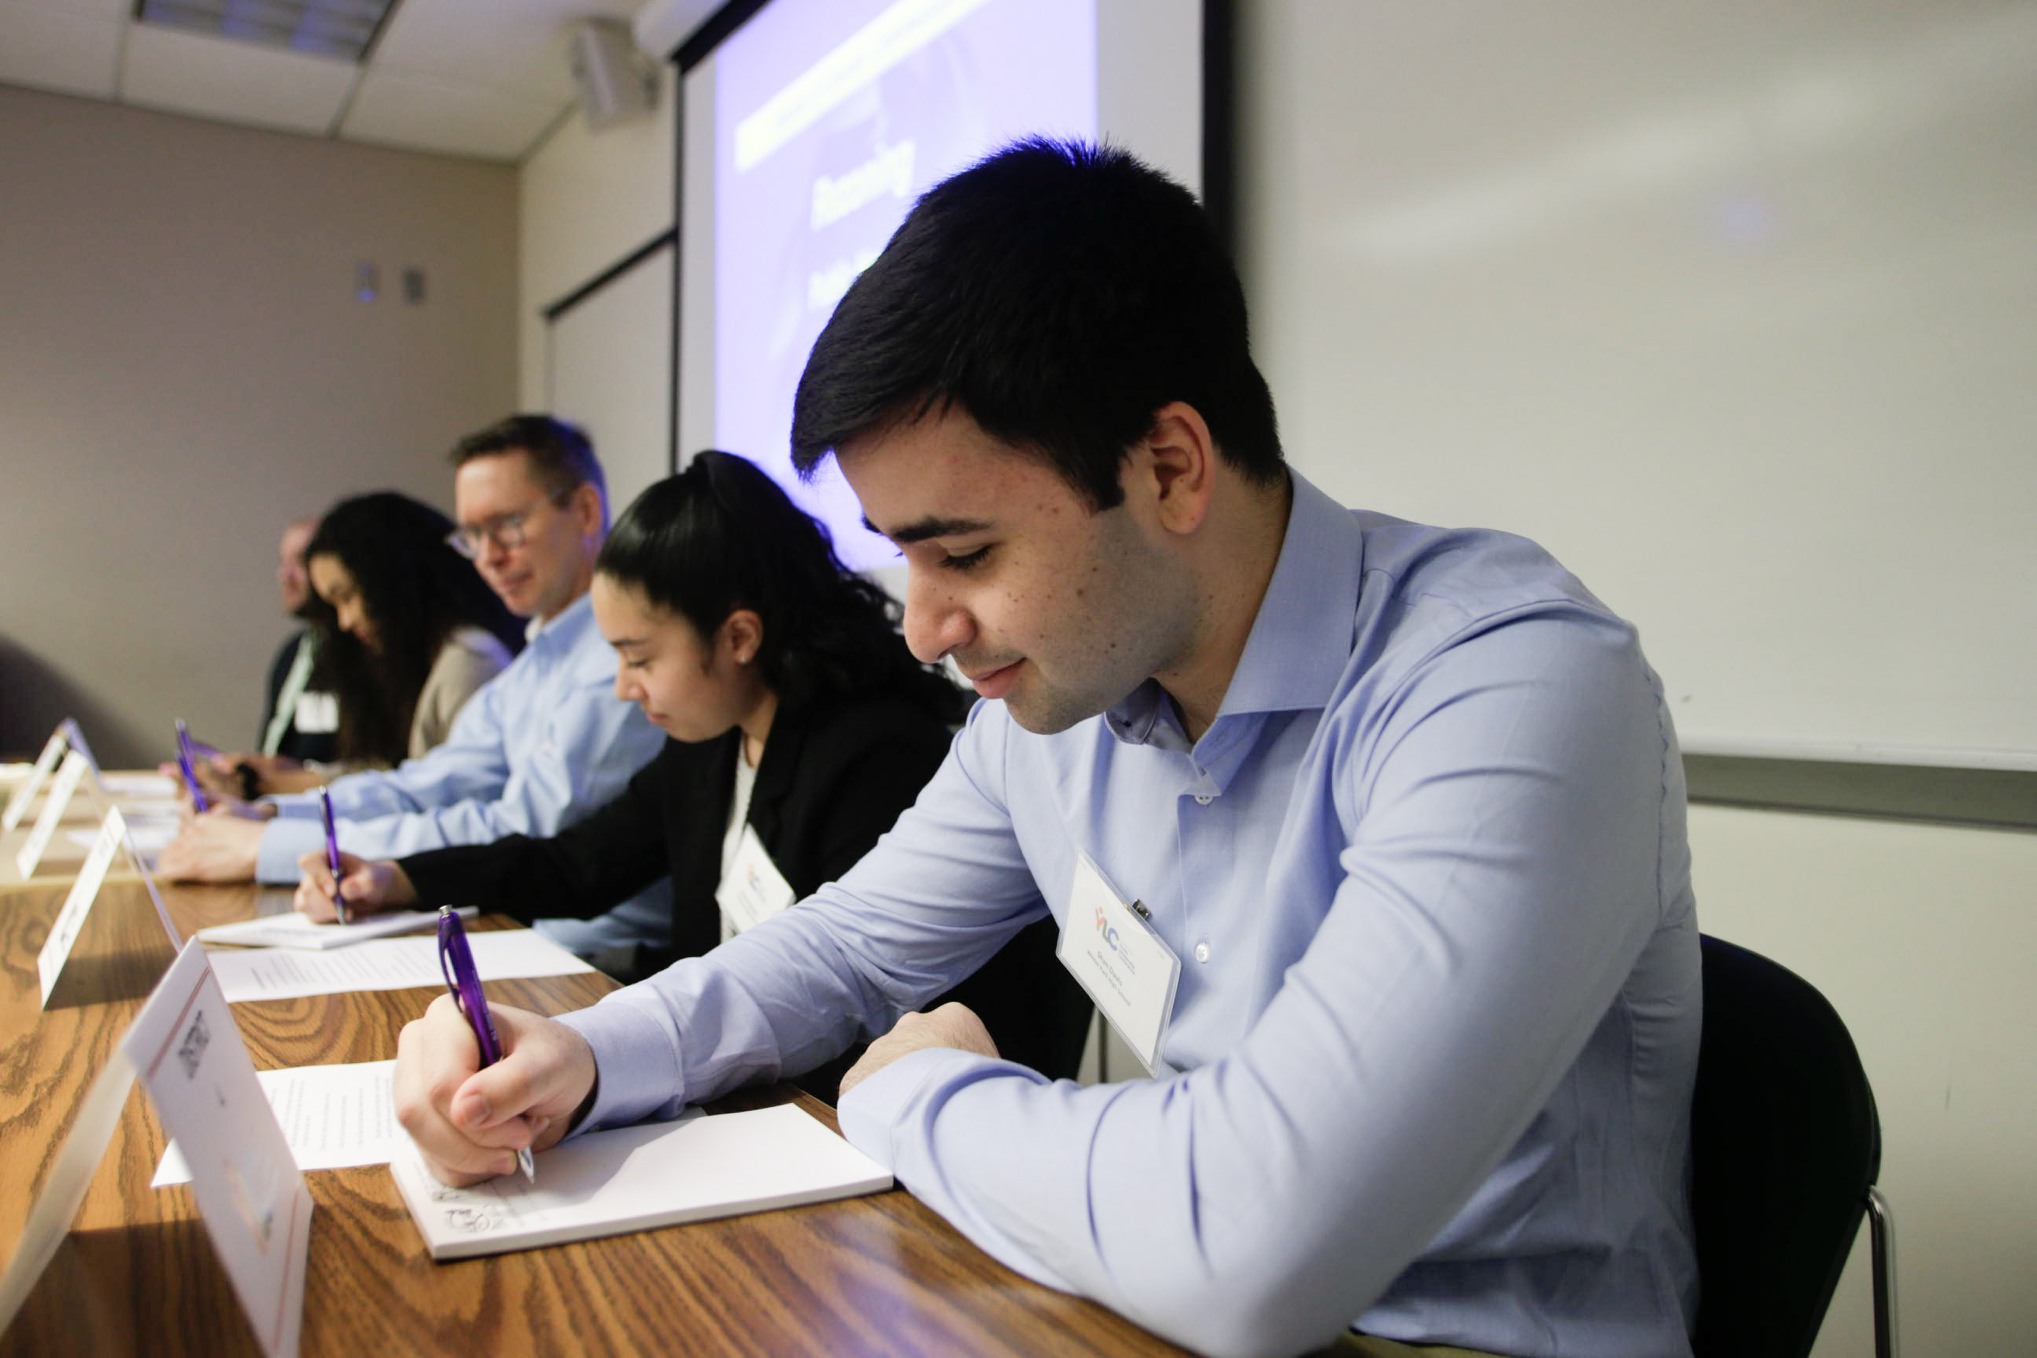 A close up shot of a student panelist focusing on a sheet of paper with pen in hand, as are the three other students and employees sitting alongside him.